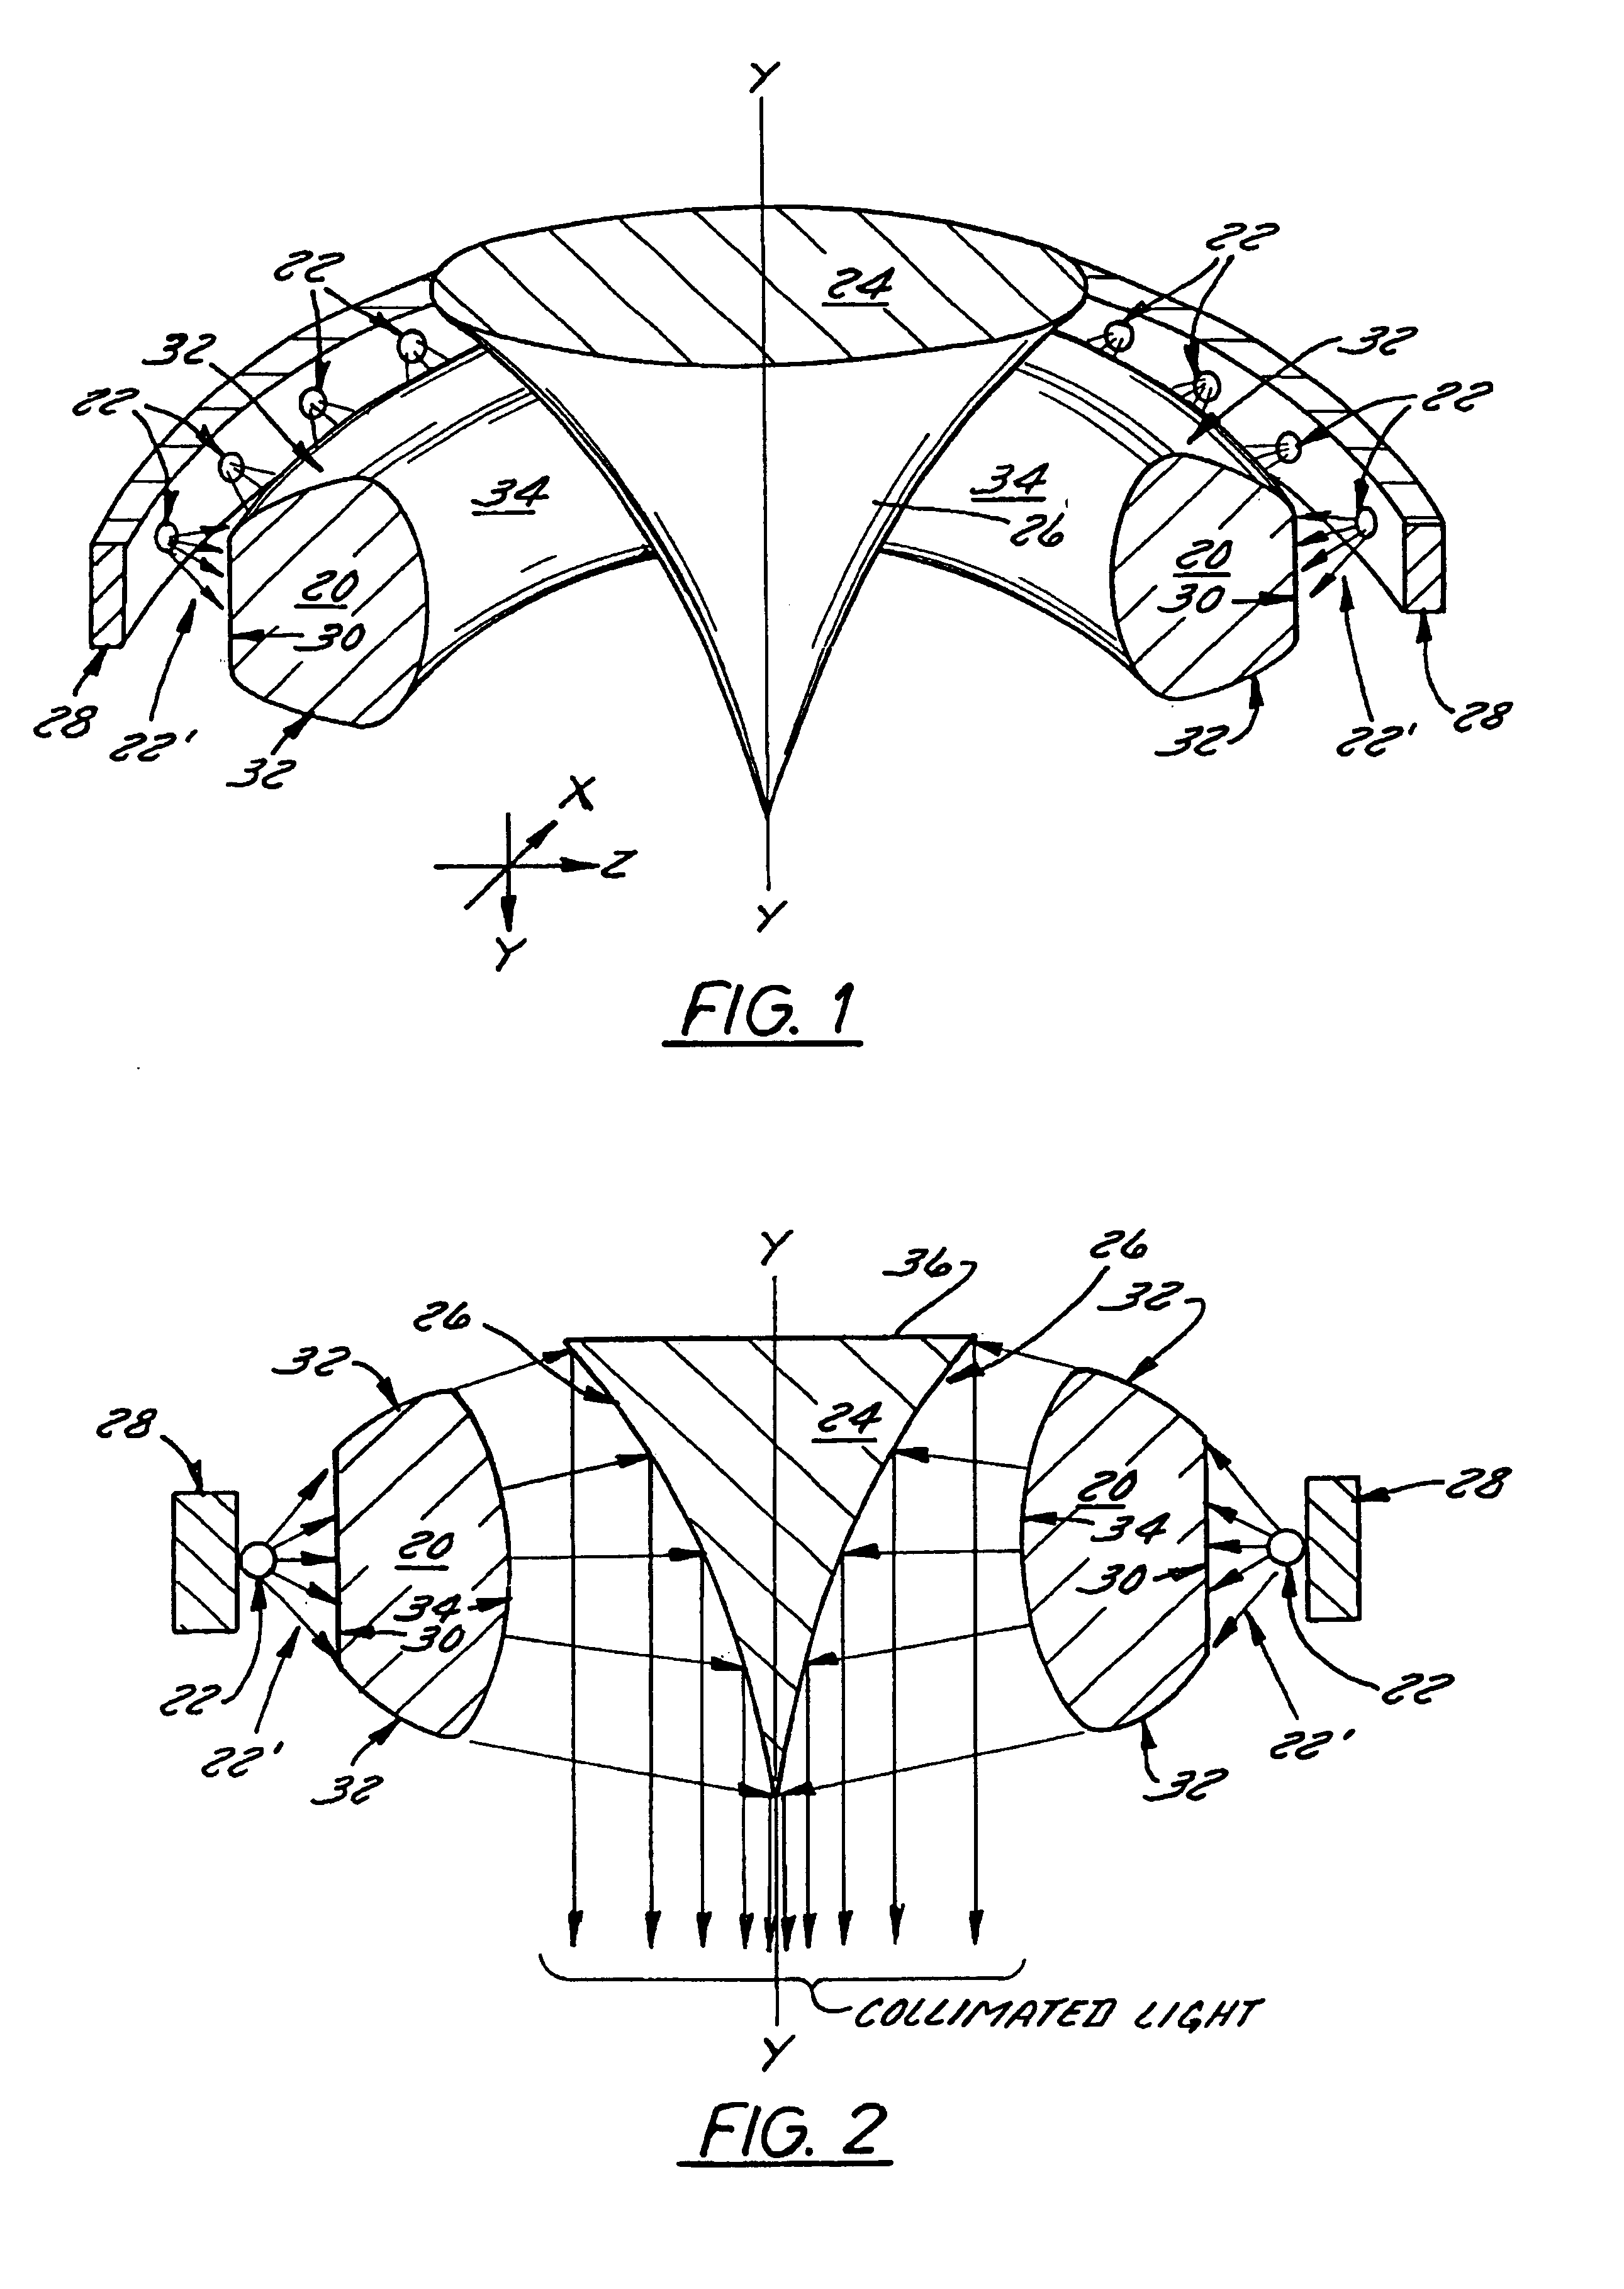 Multiple source collimated beam luminaire